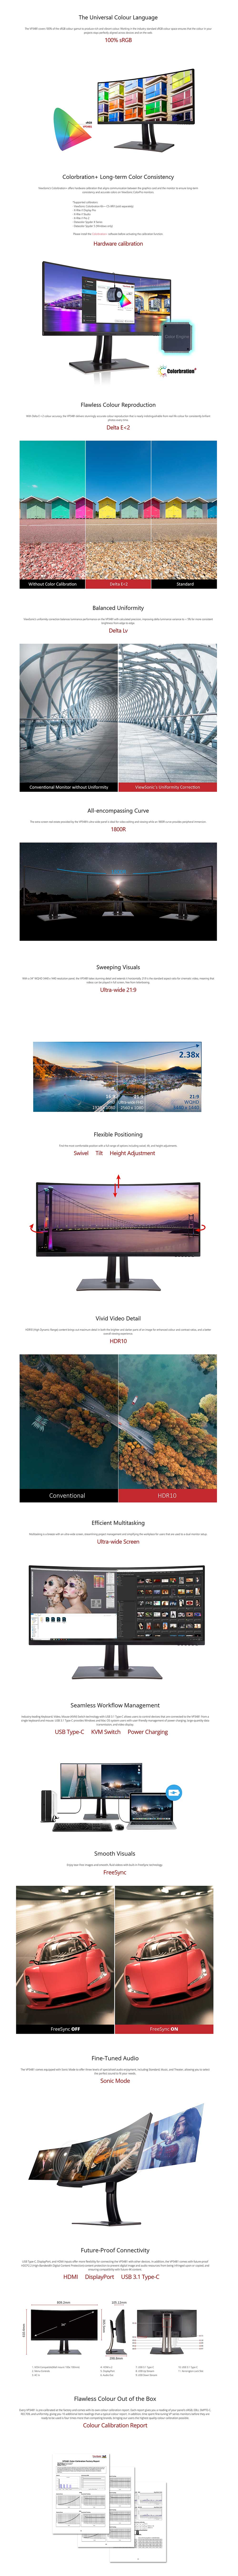 ViewSonic VP3481 34in WQHD Ultra-Wide Curved Professional Monitor Details